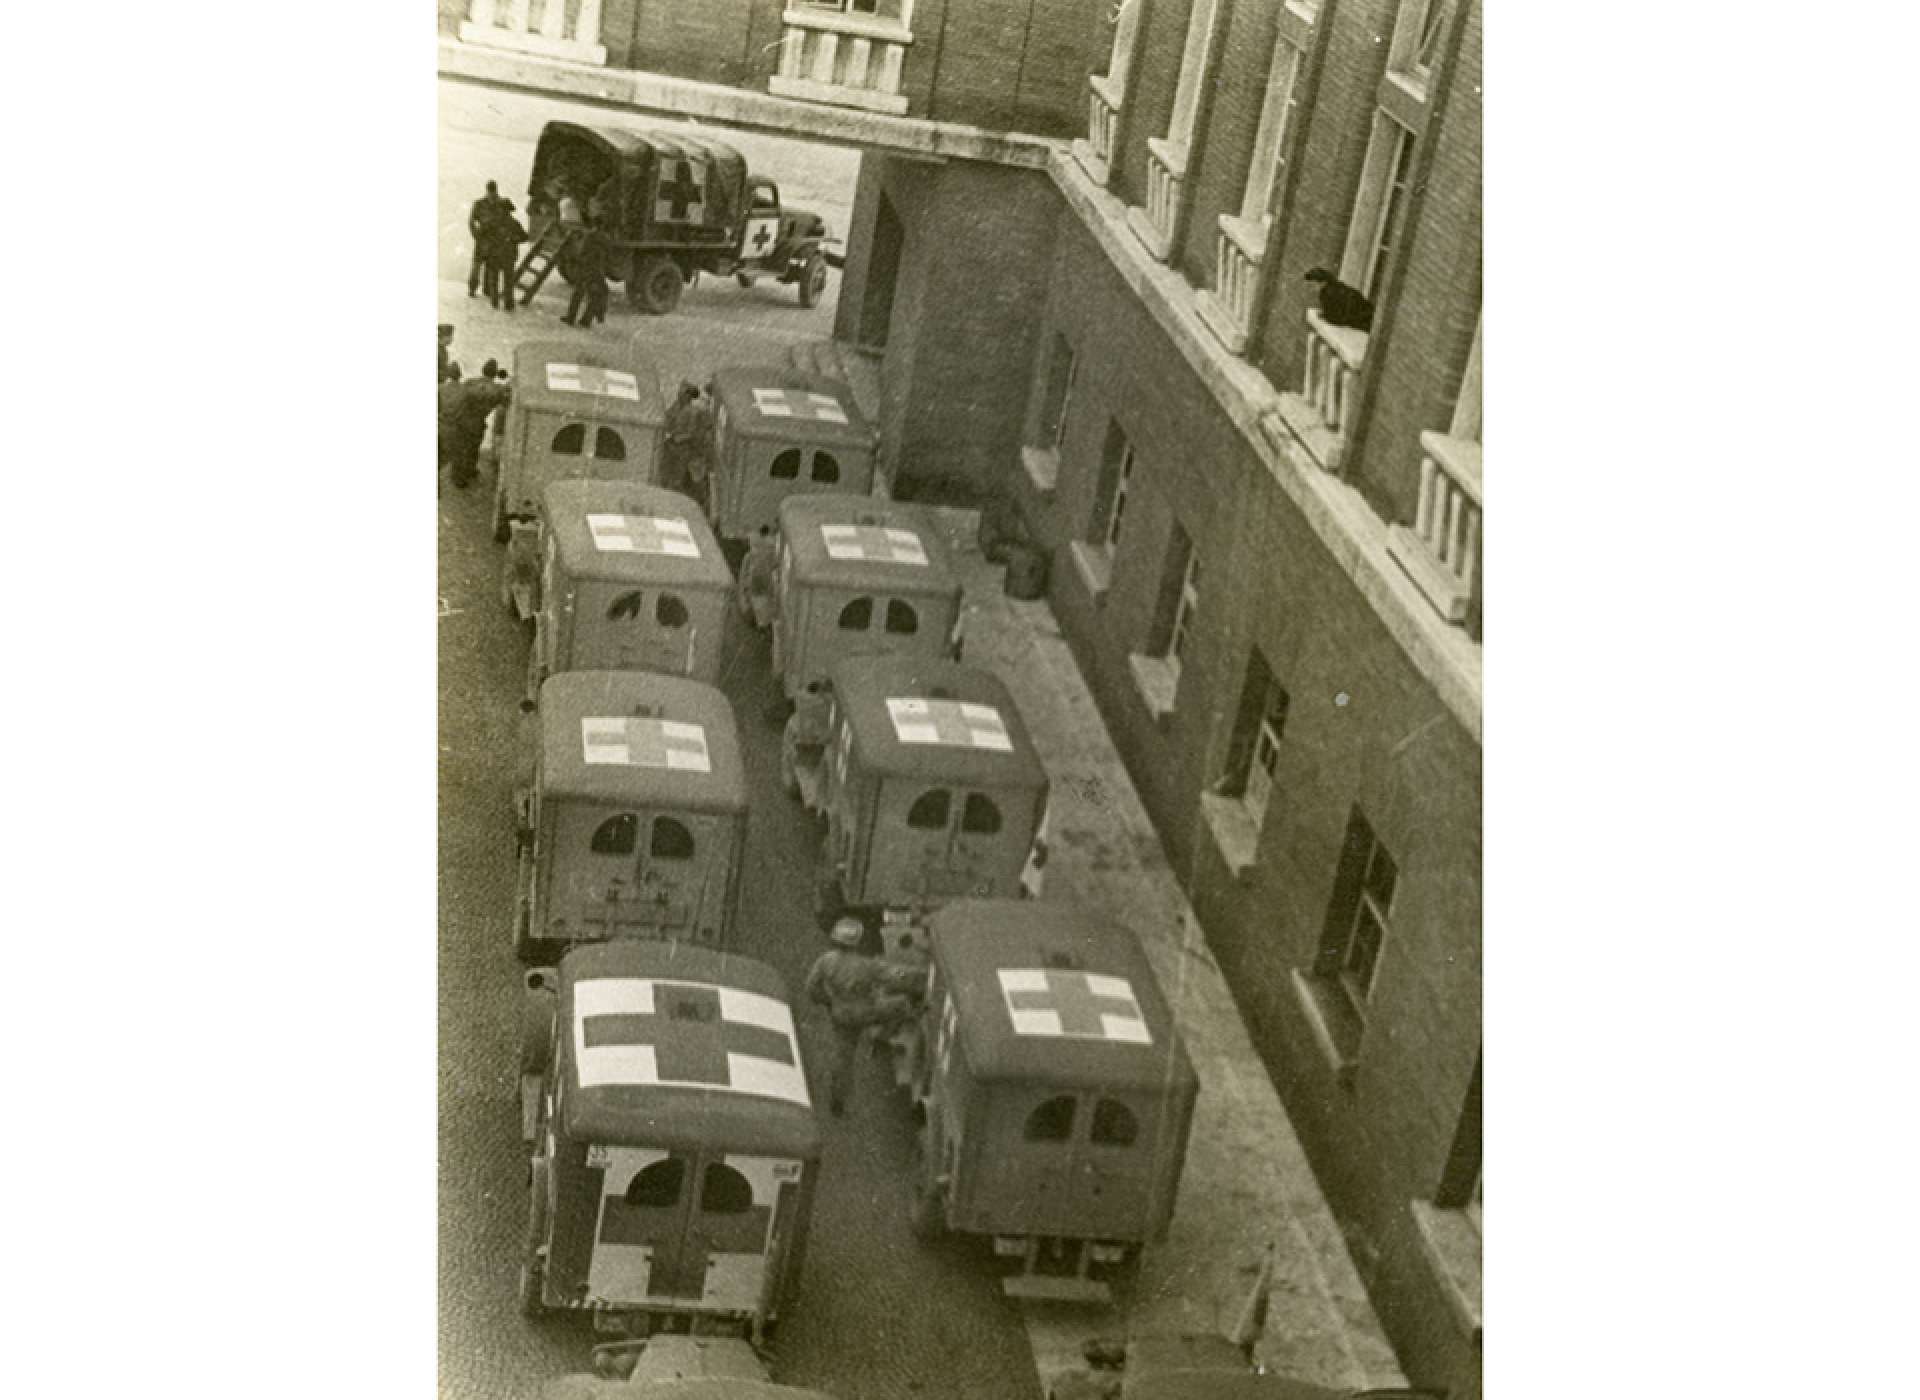 Ambulances lined up outside of the hospital in Florence. The original caption echoes Lt. Col. Miller’s experience there: “Florence, pts (patients) in, pts out.” The National WWII Museum